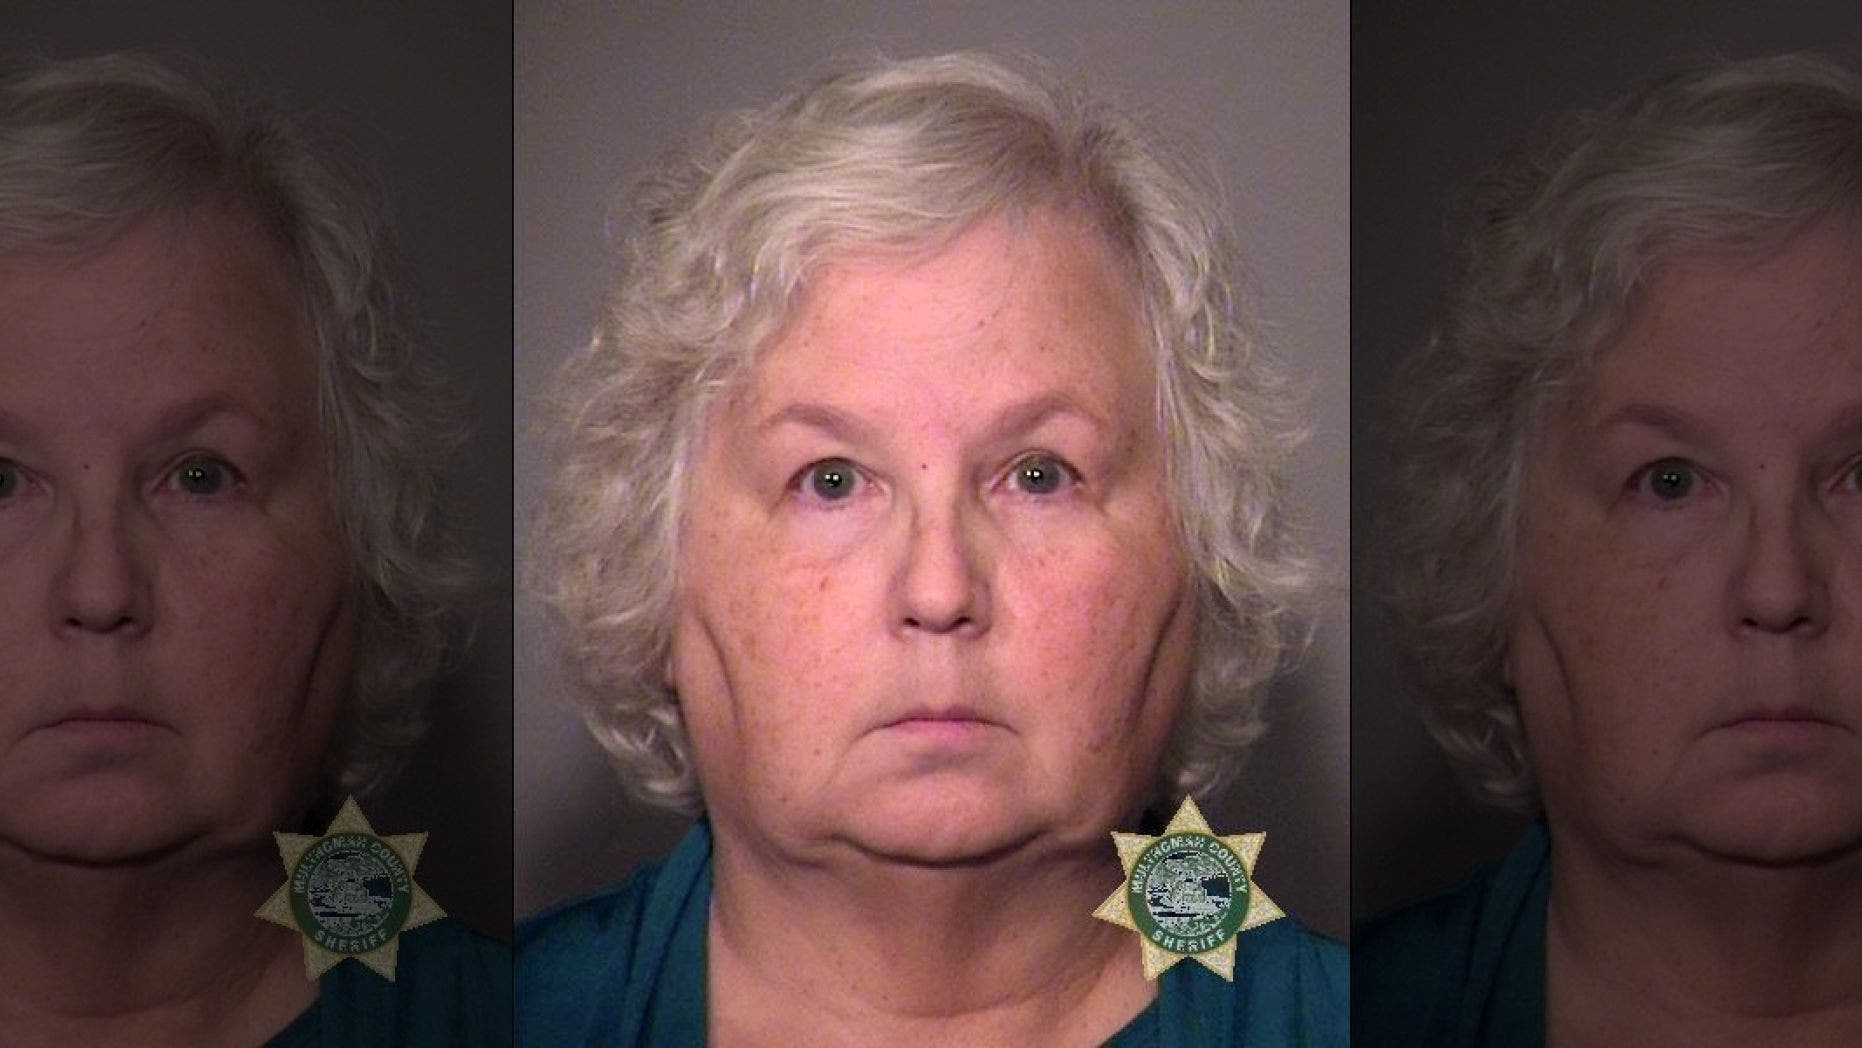 ‘How to Murder Your Husband’ author Nancy Crampton Brophy found guilty in real-life Oregon murder